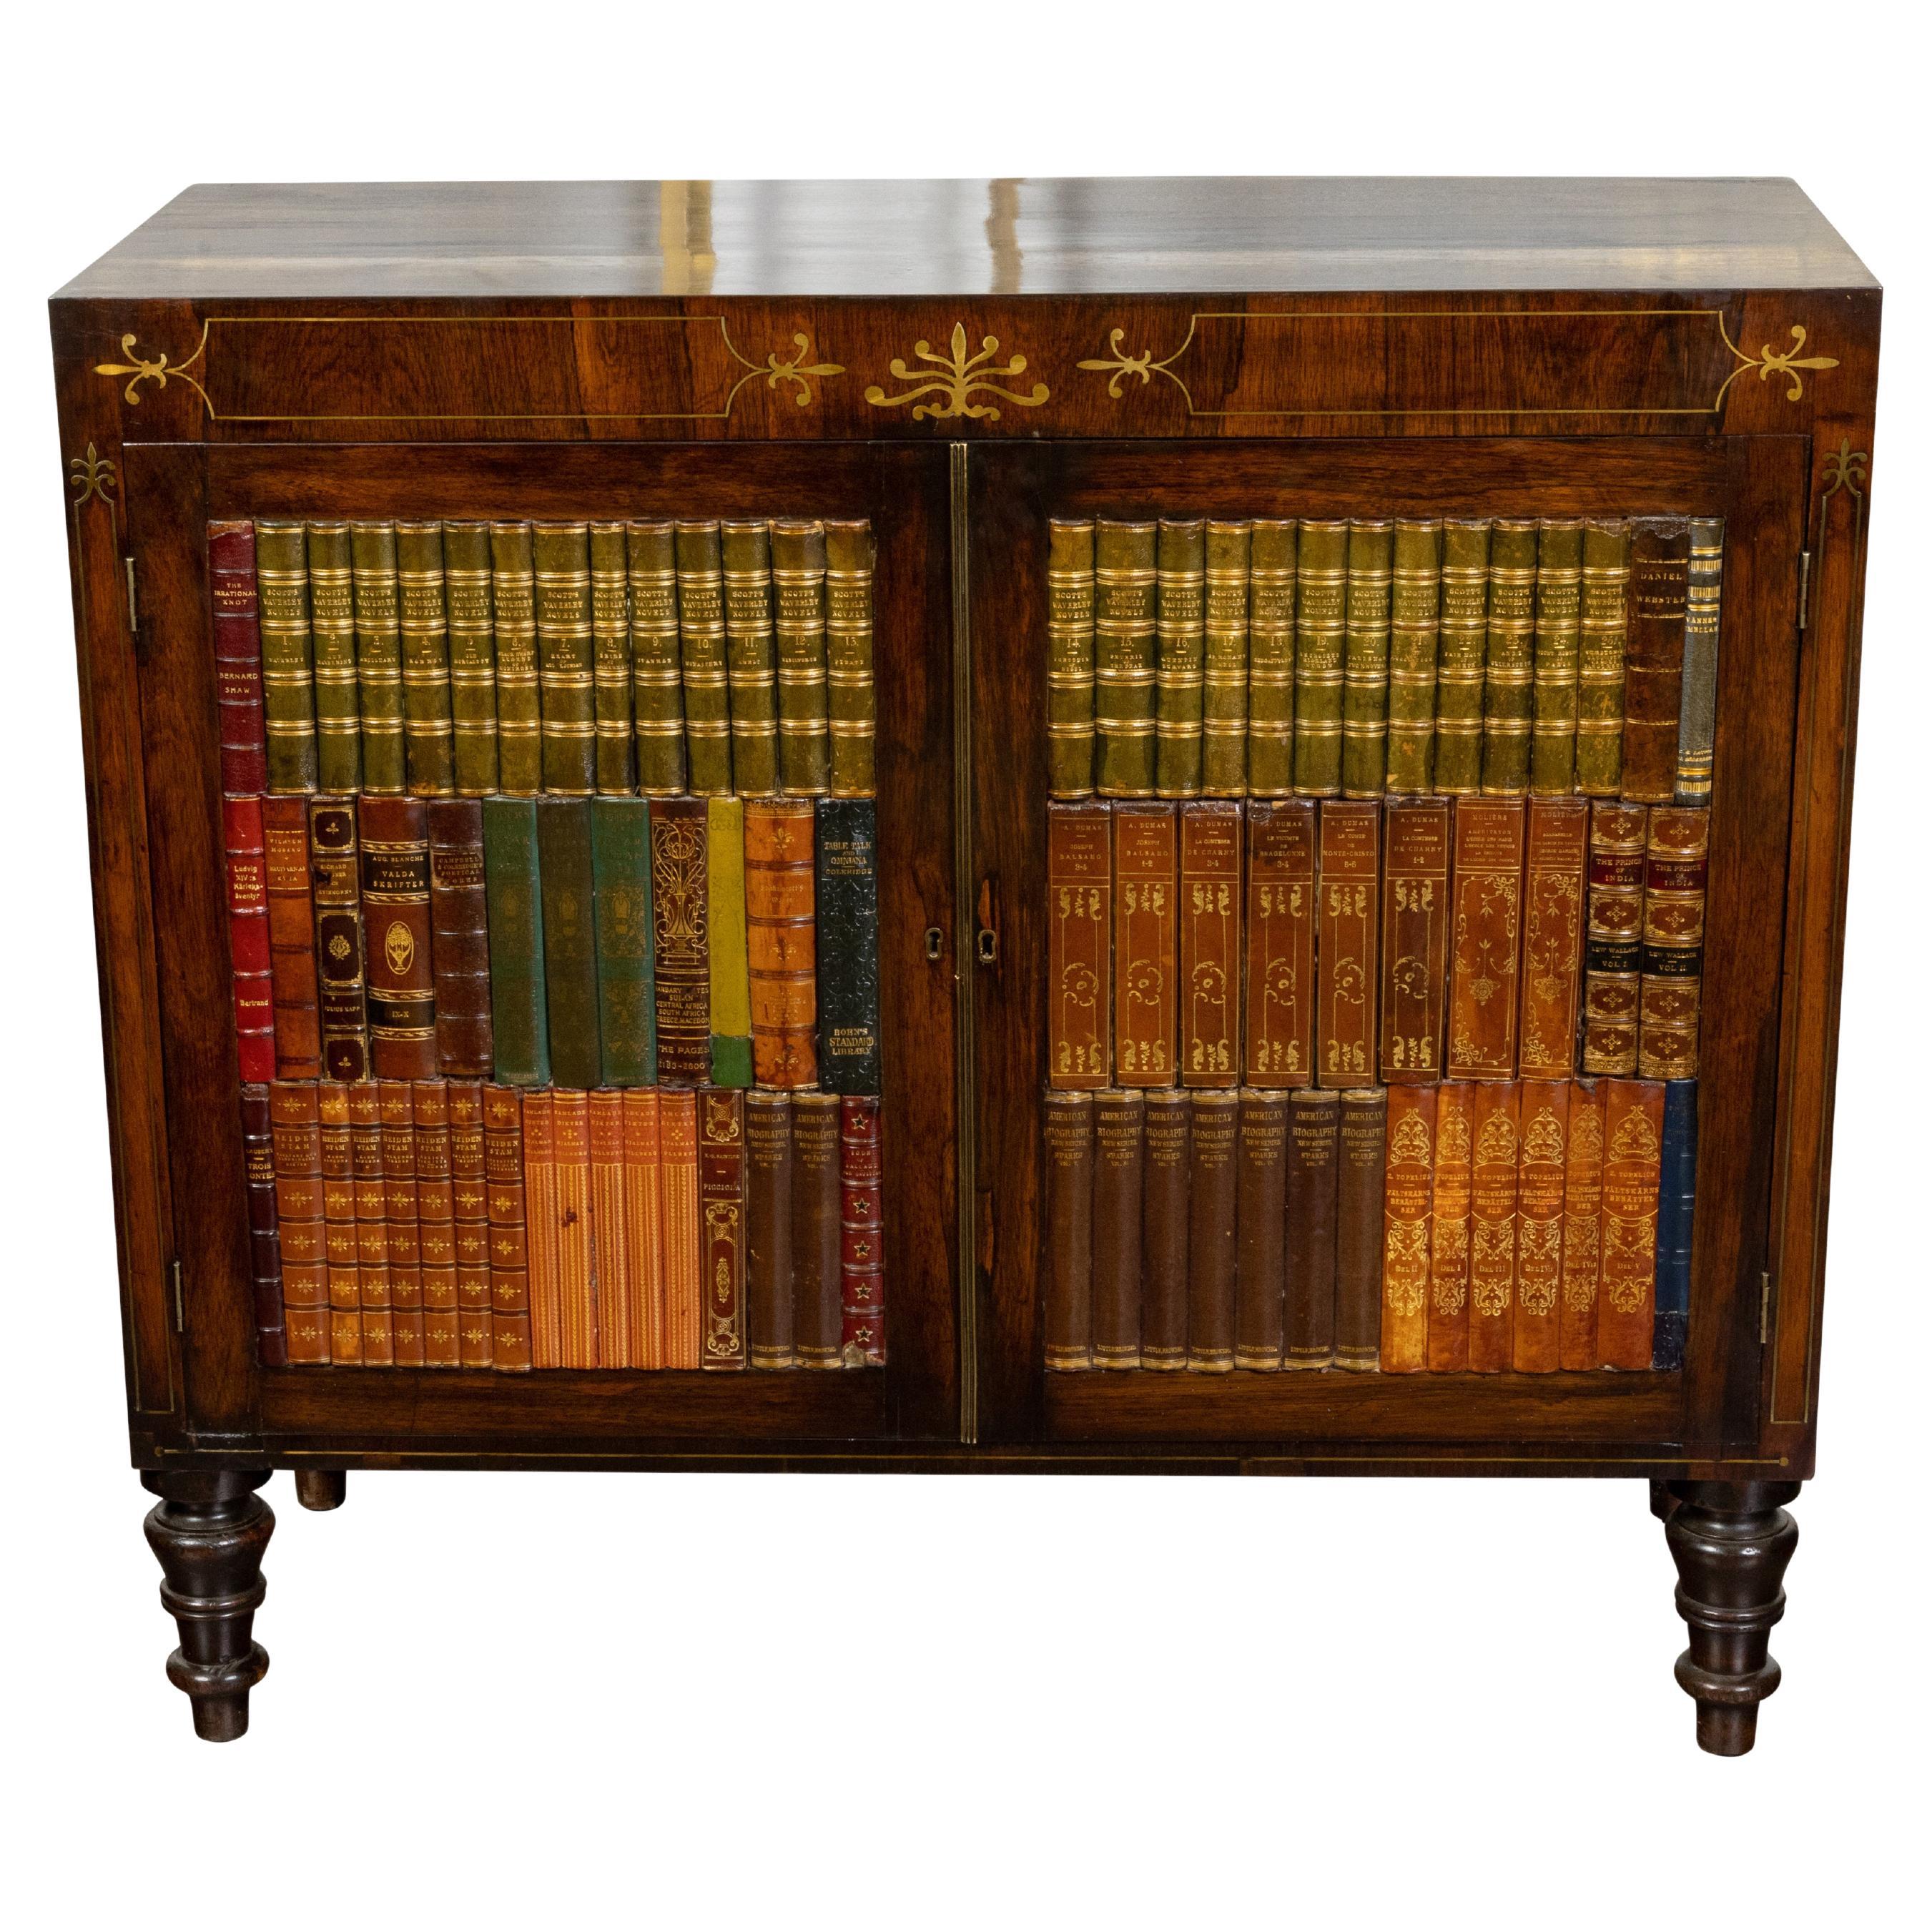 English 1840s Mahogany Cabinet with Leather Faux Books and Foliage Inlay For Sale